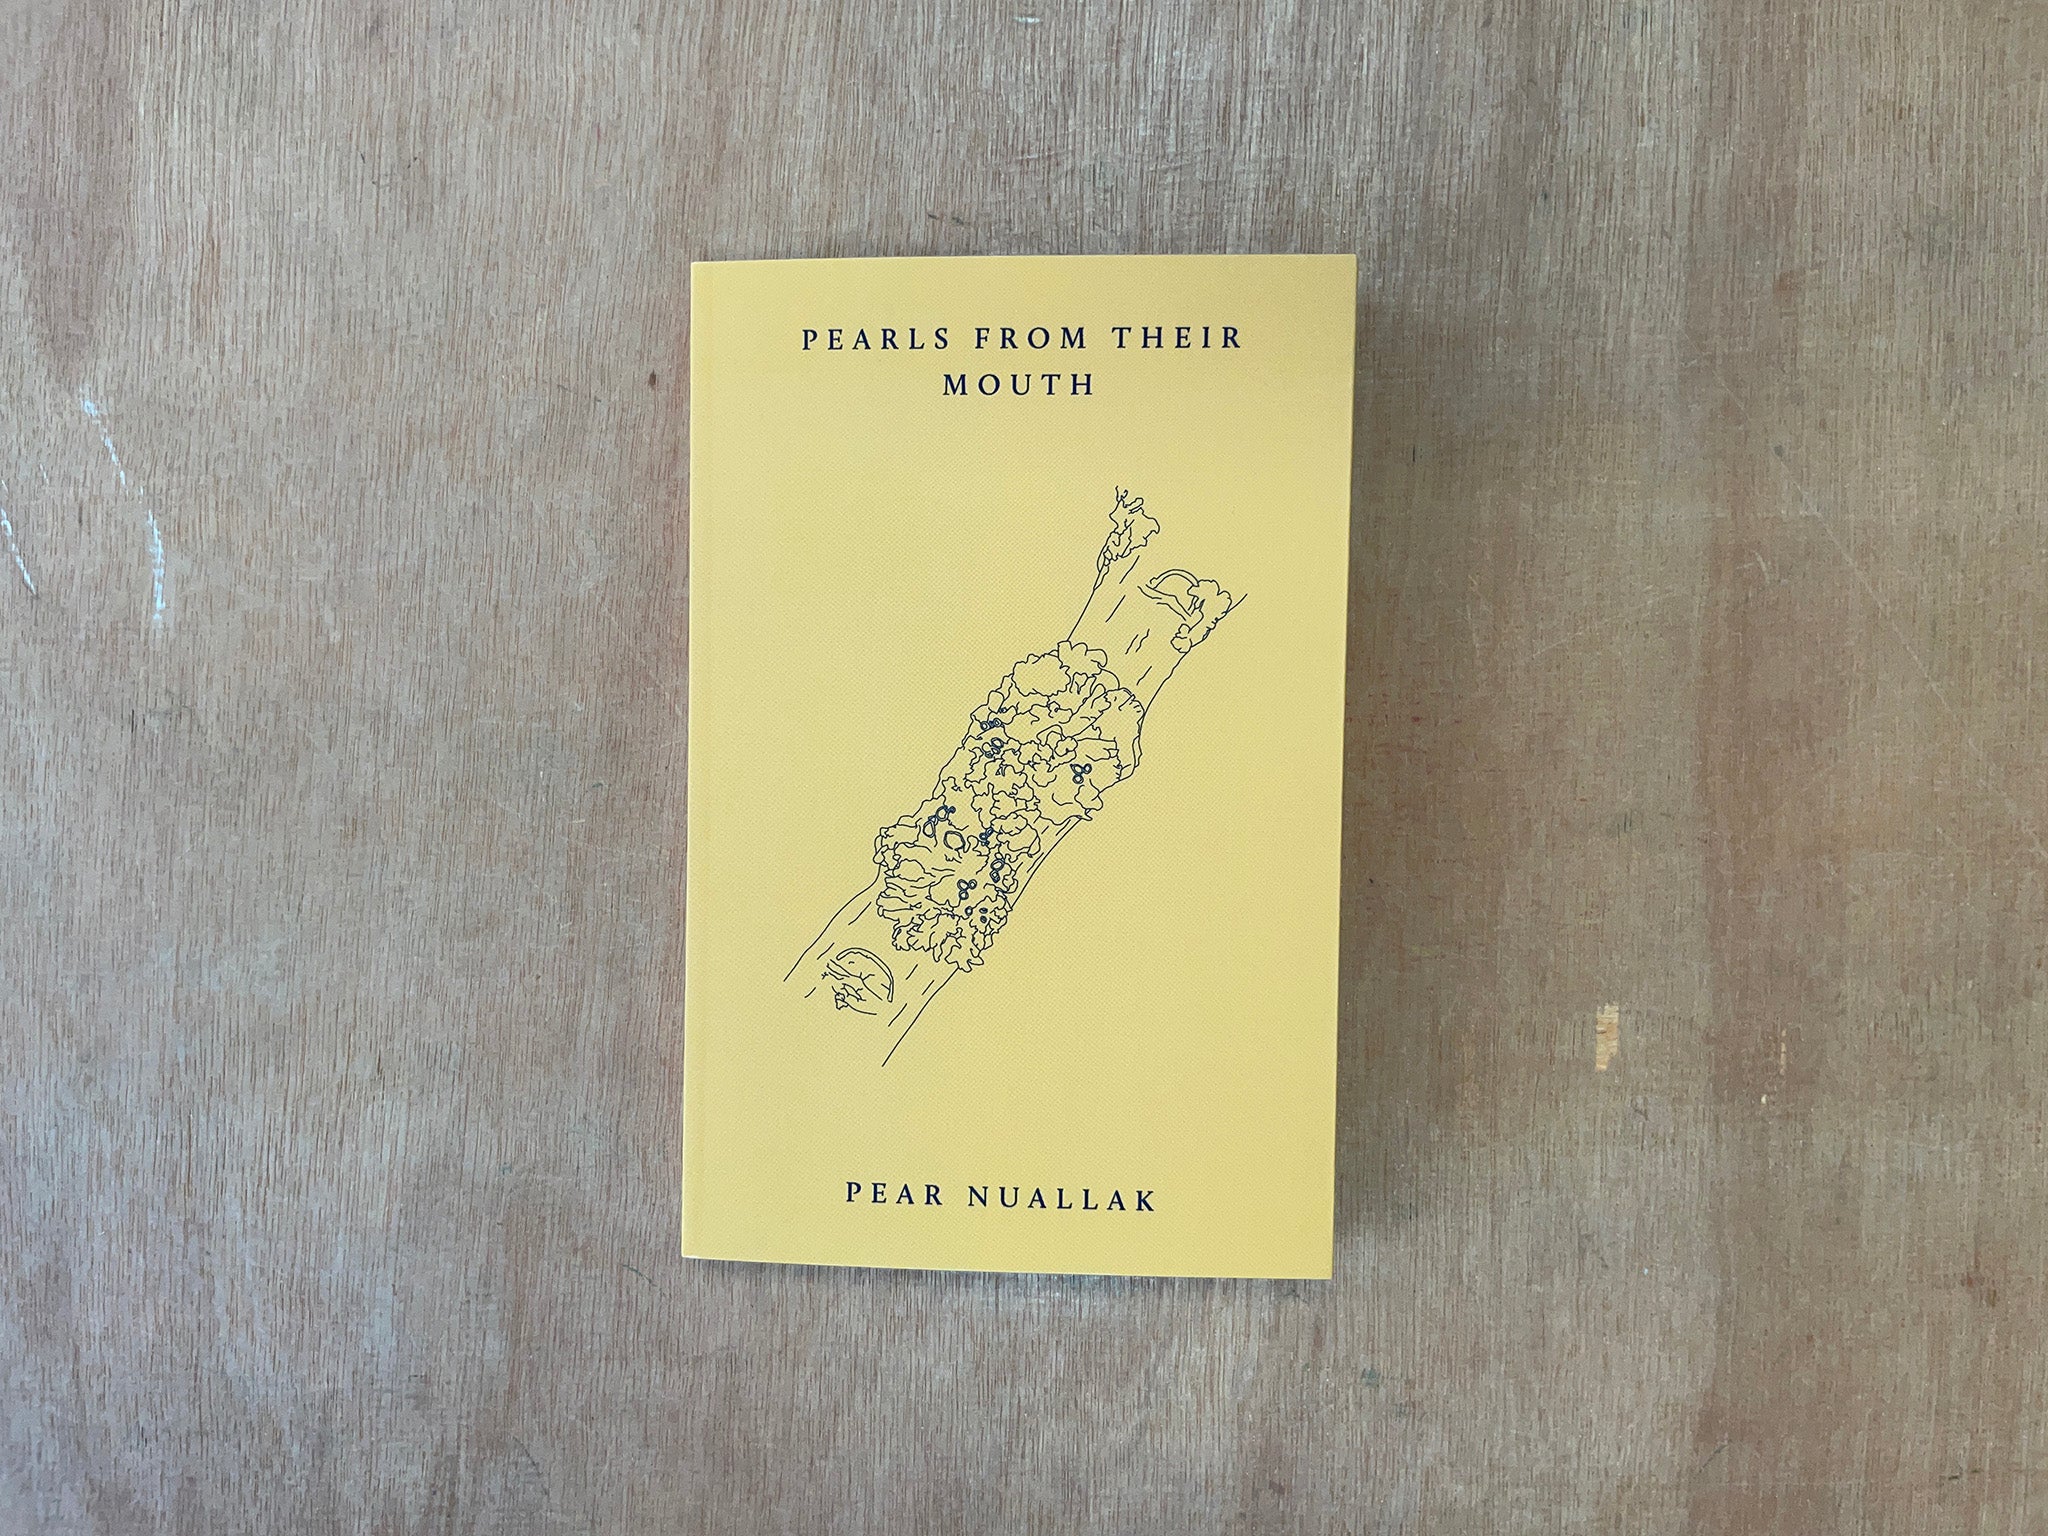 PEARLS FROM THEIR MOUTH by Pear Nuallak